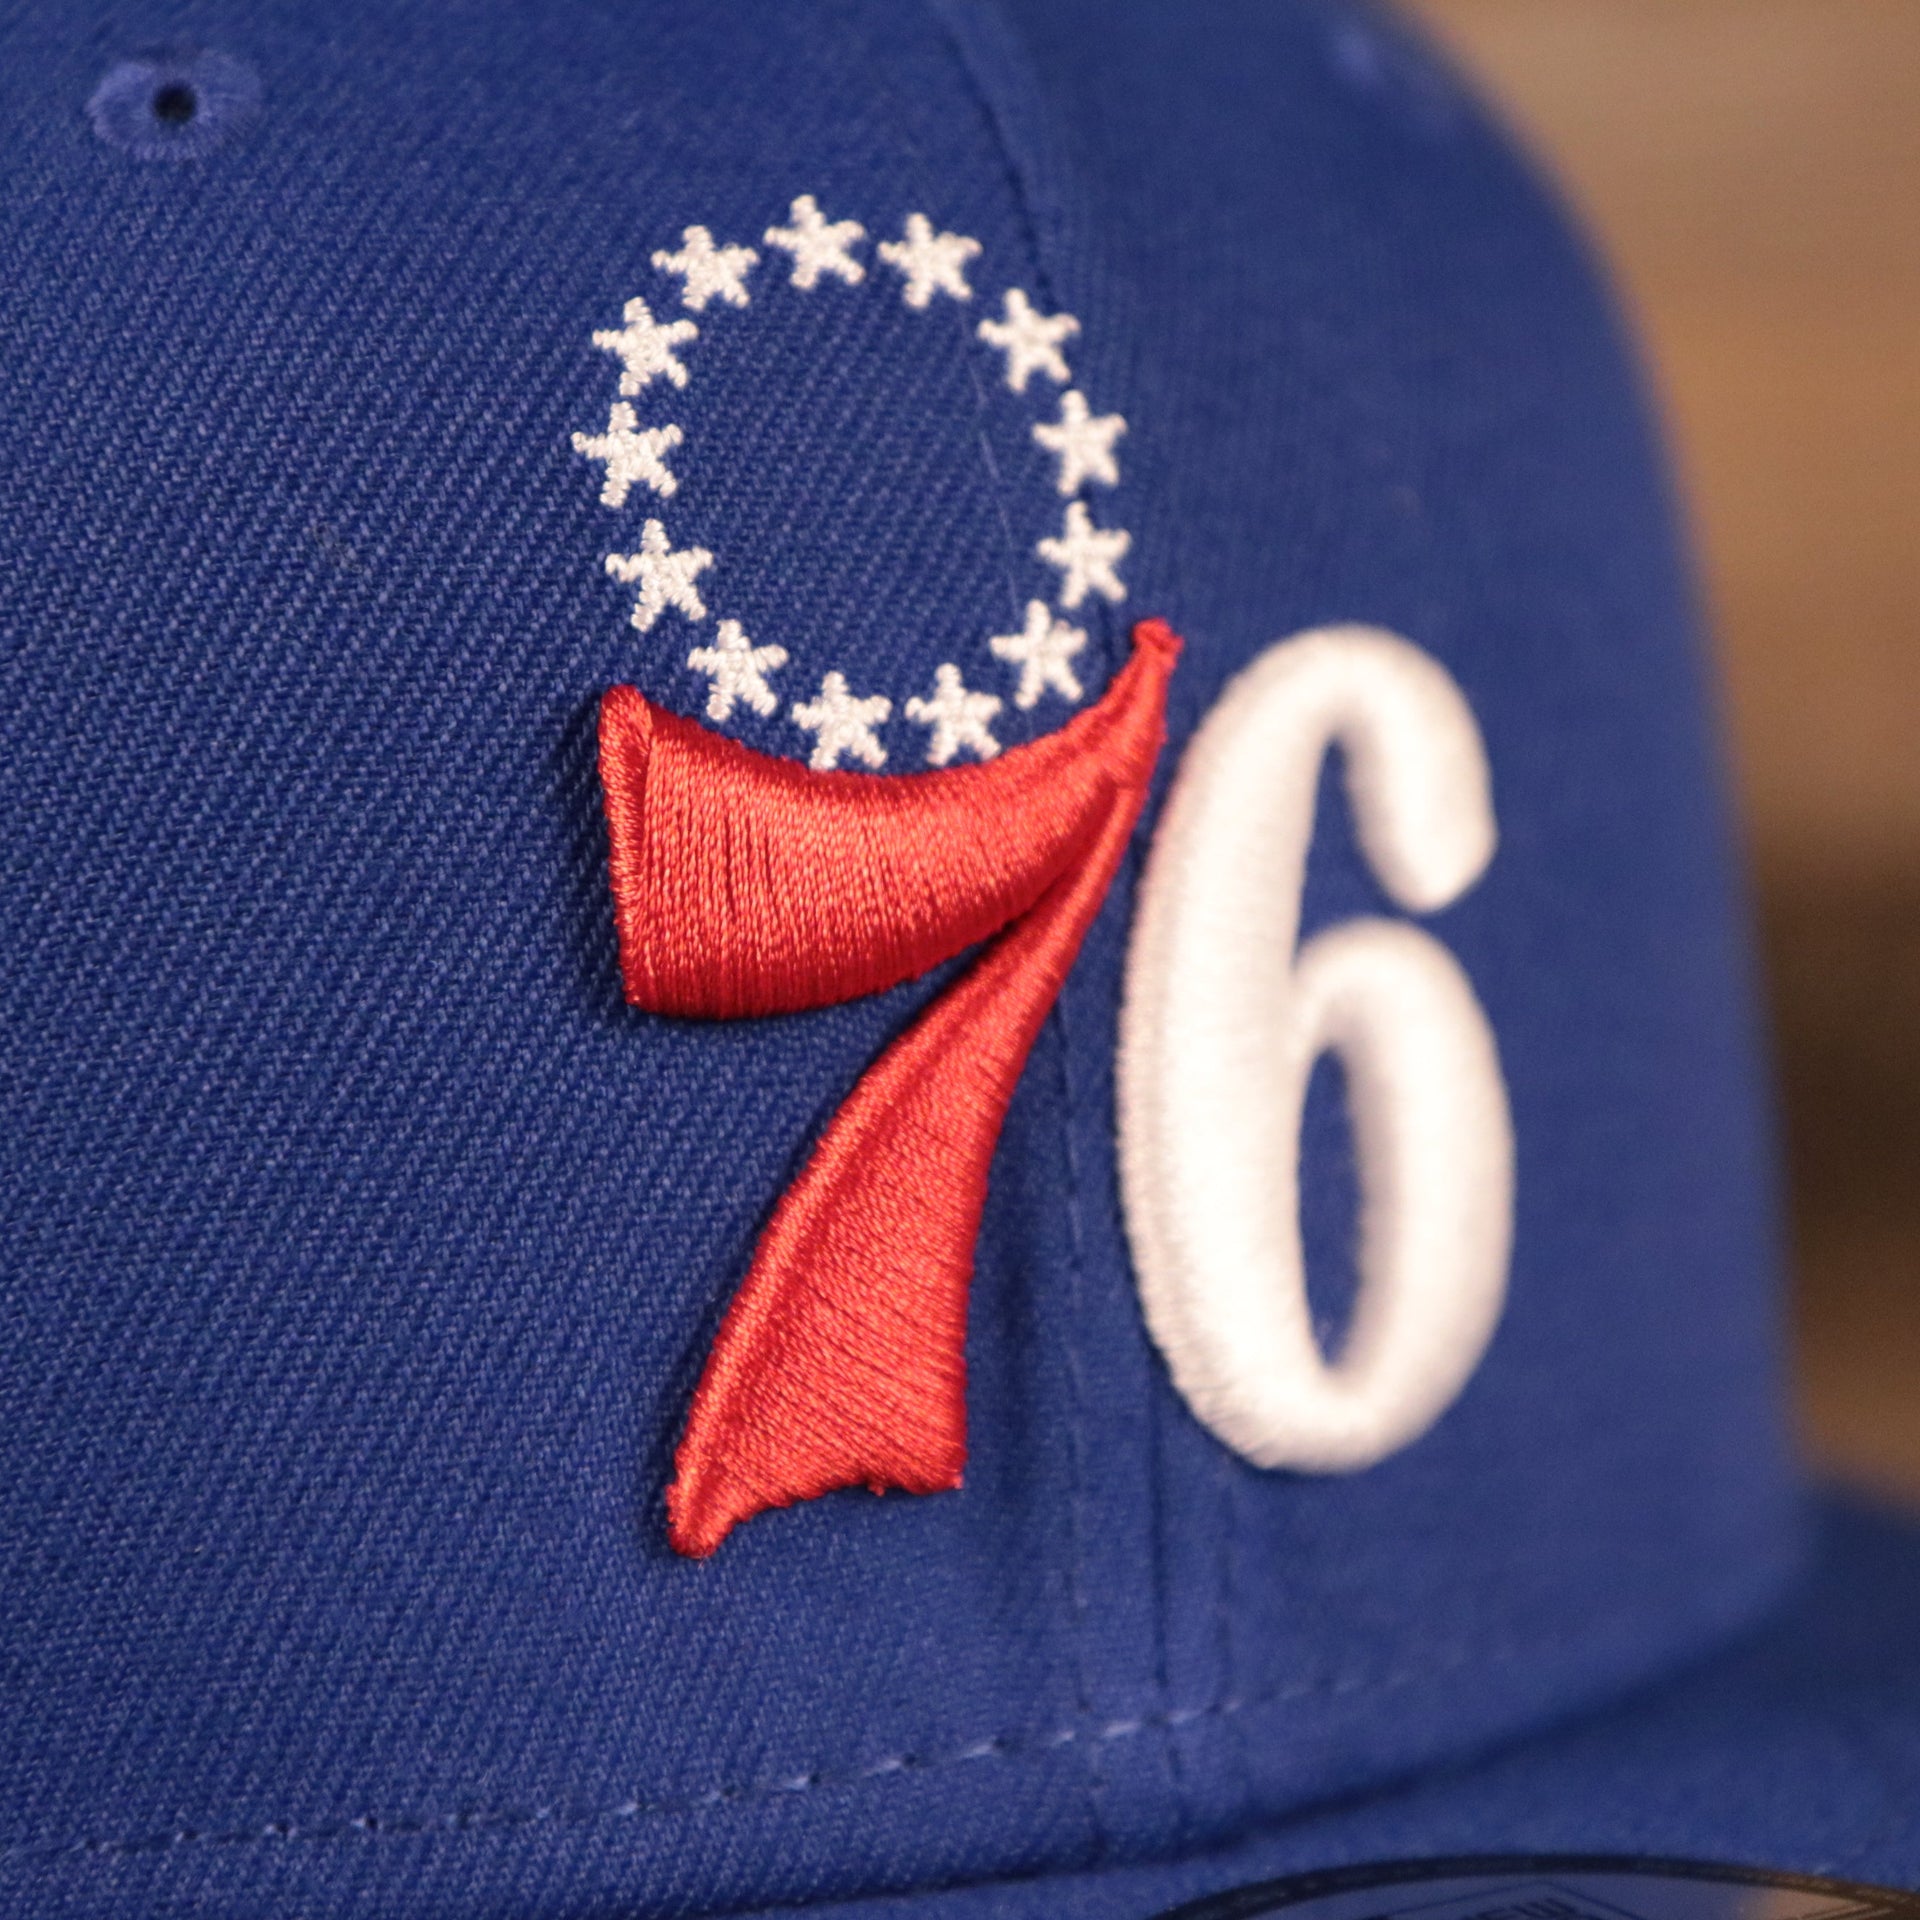 The Philadelphia 76ers logo on the front side of the royal blue New Era 920 snapback hat.